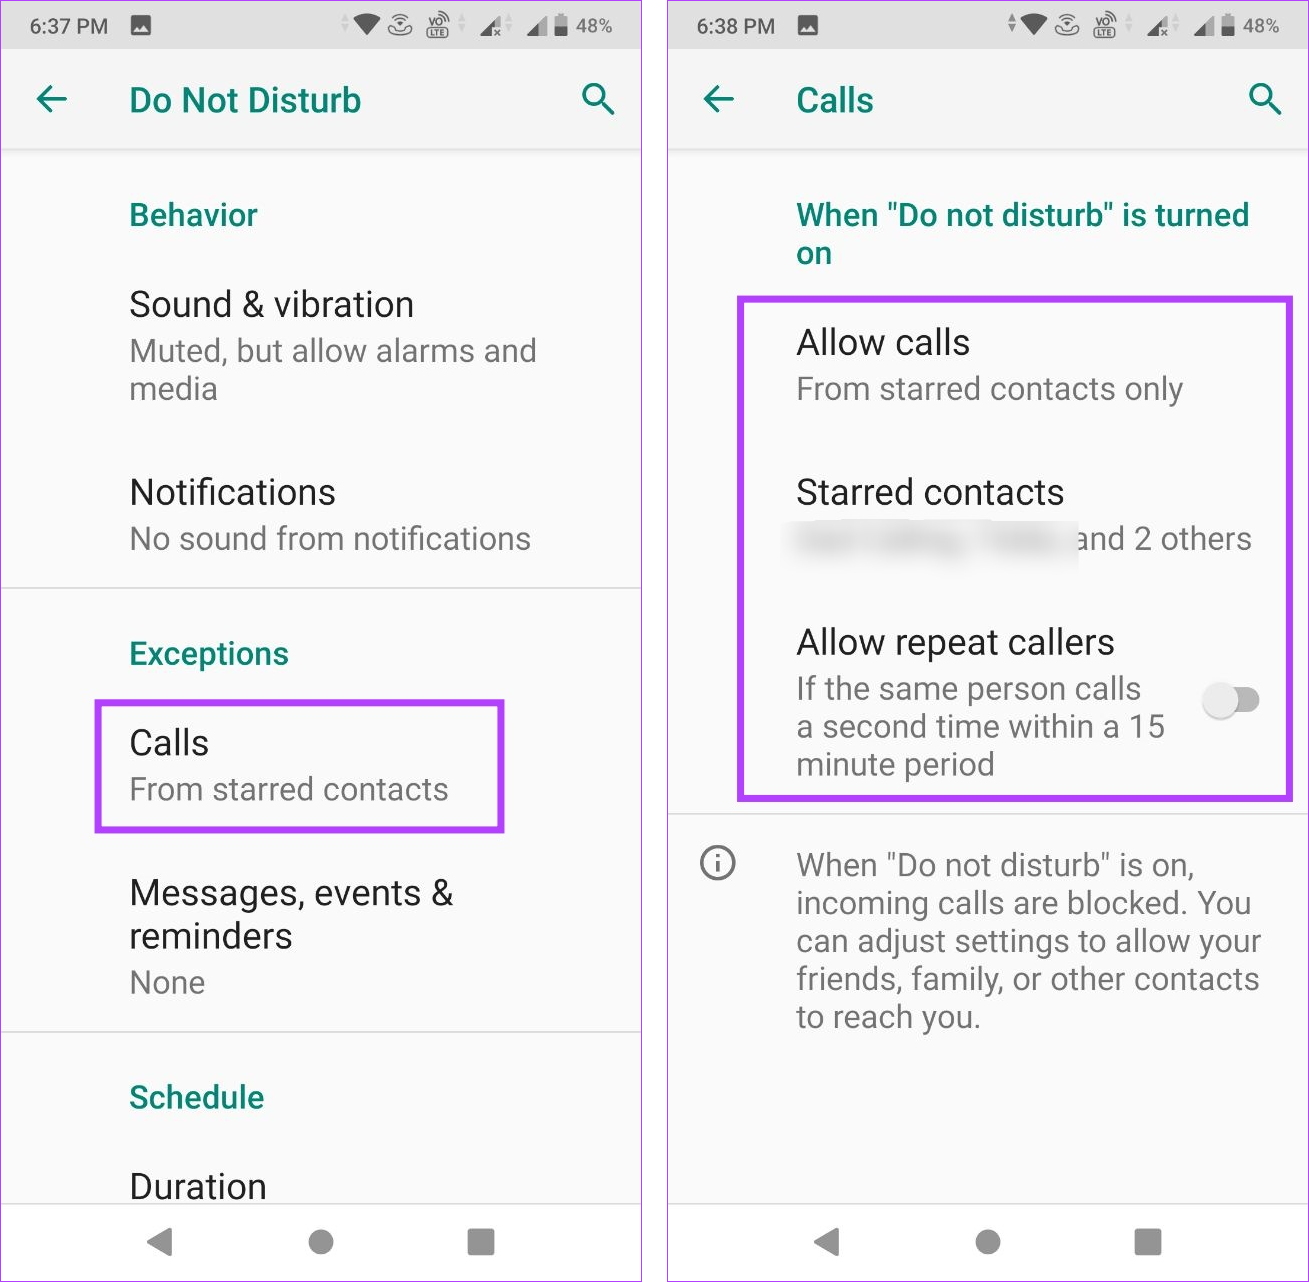 Add DND exception for calls